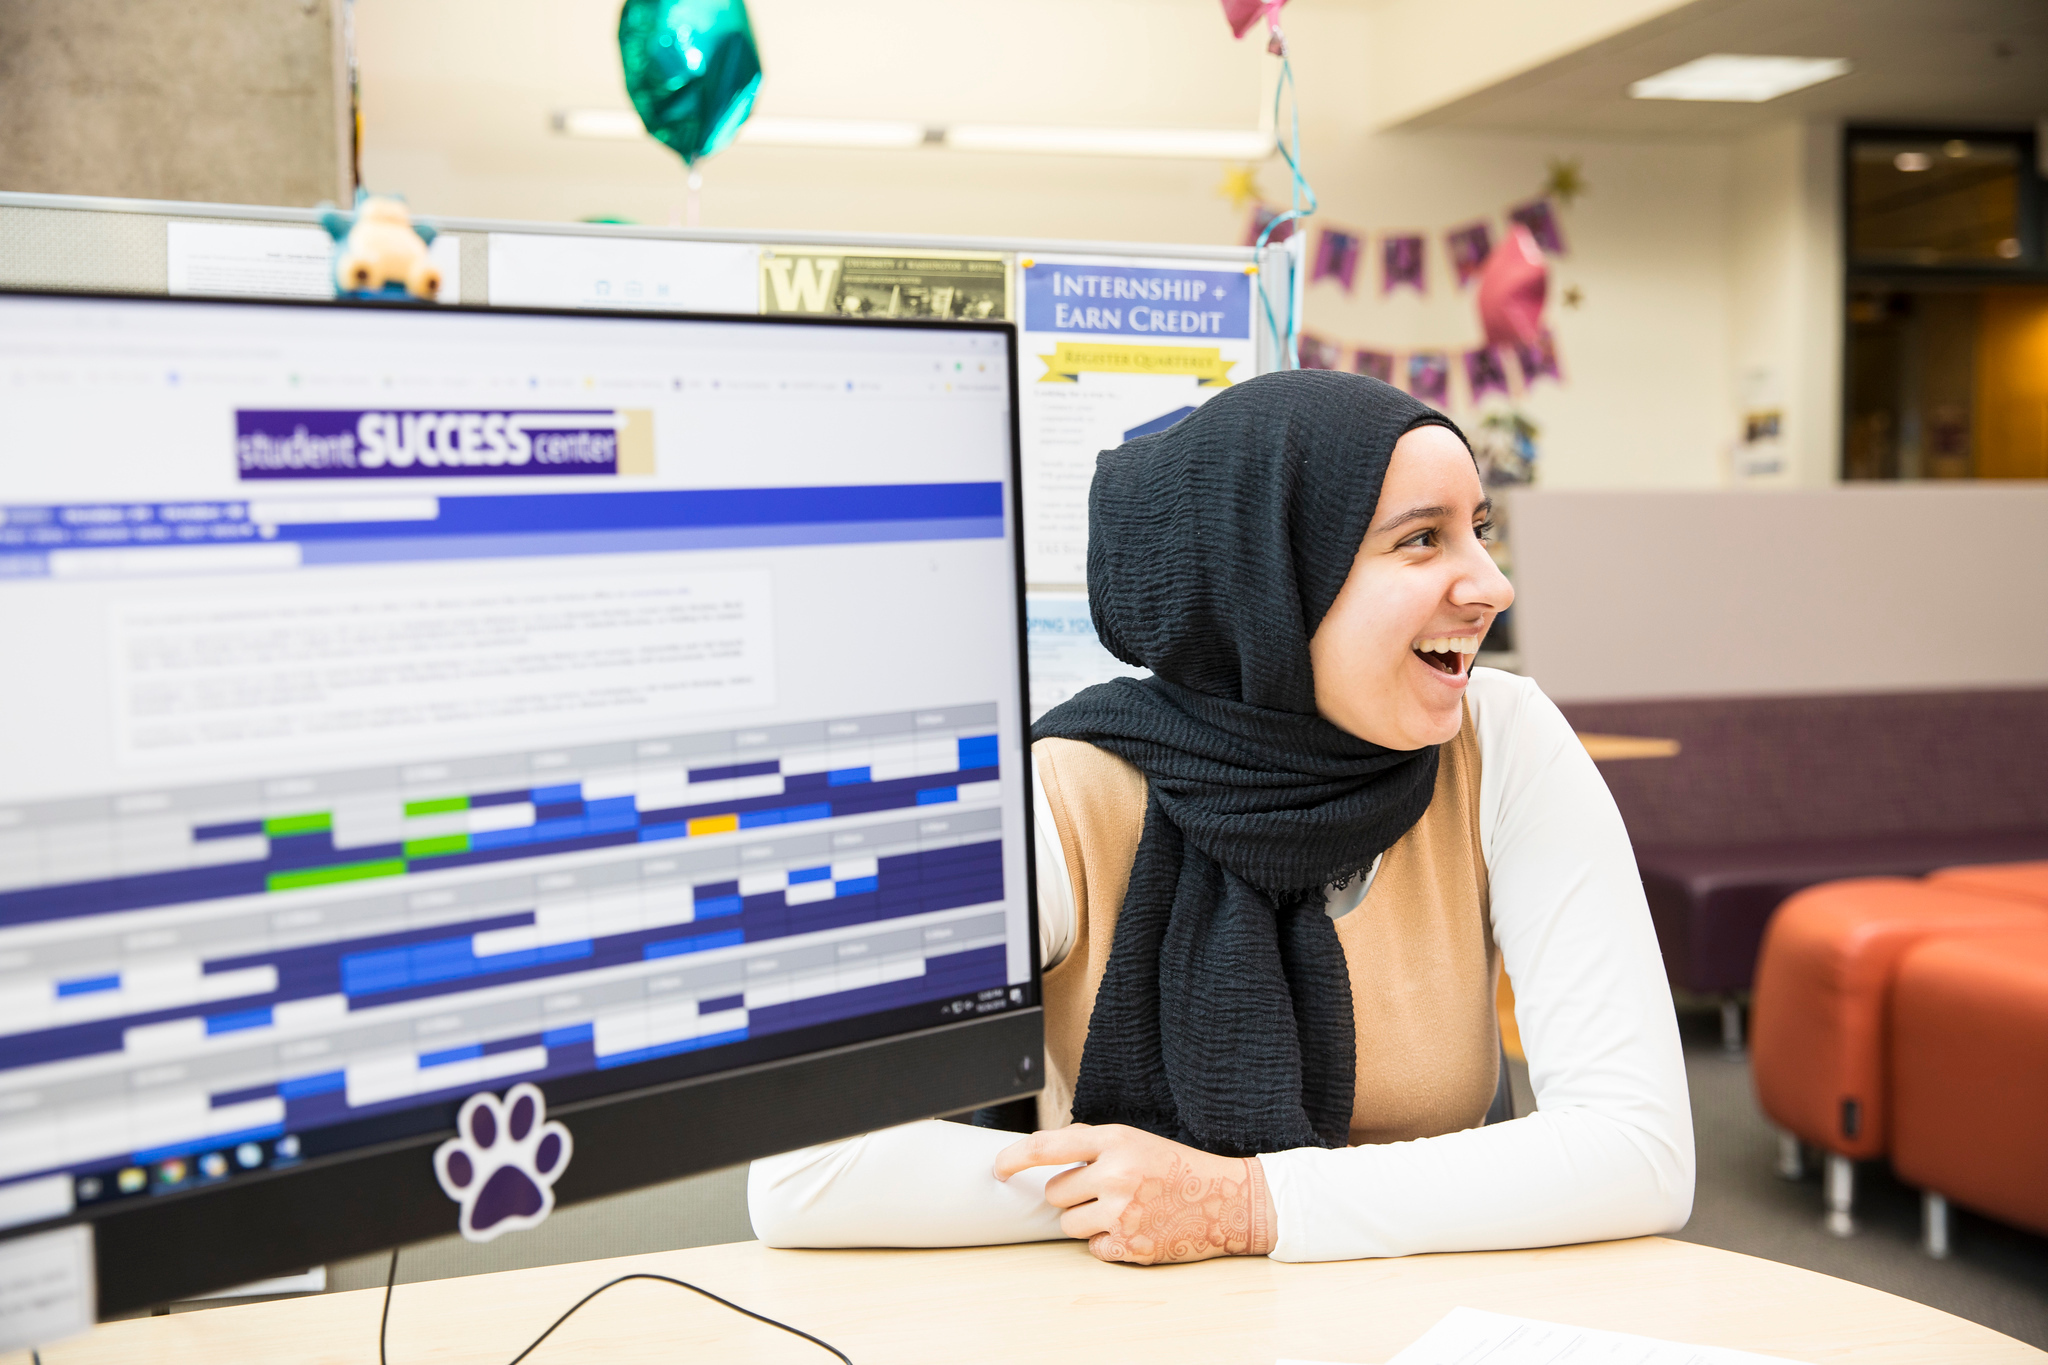 A student looks at a monitor with a success plan displayed.